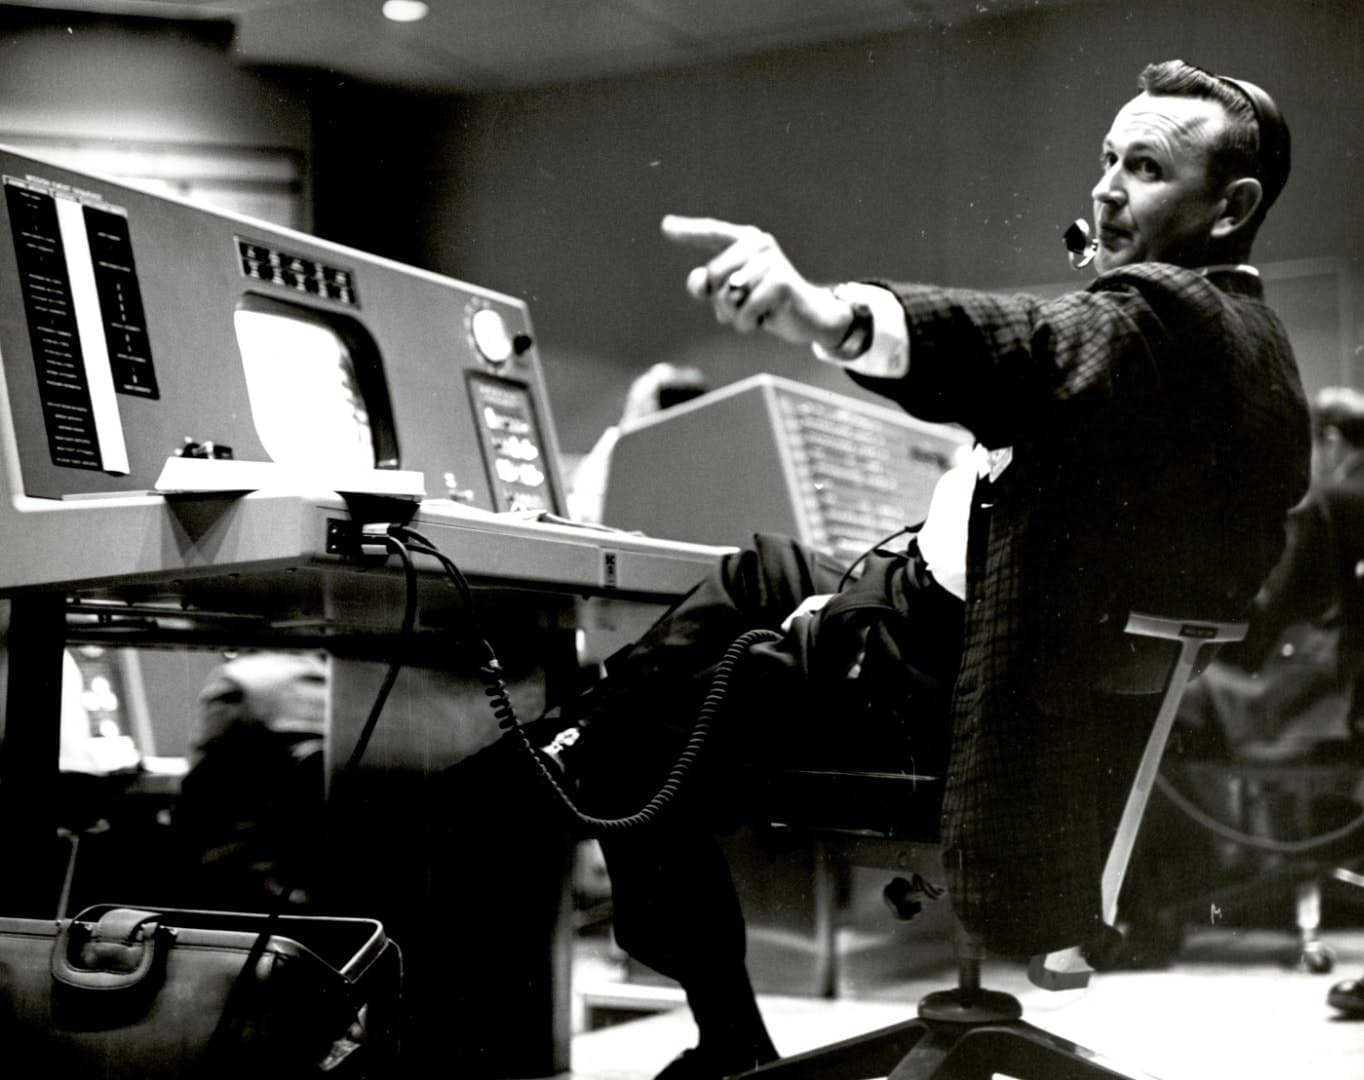 Chris Kraft – The Inventor Of NASA Mission Control - Has Passed Away